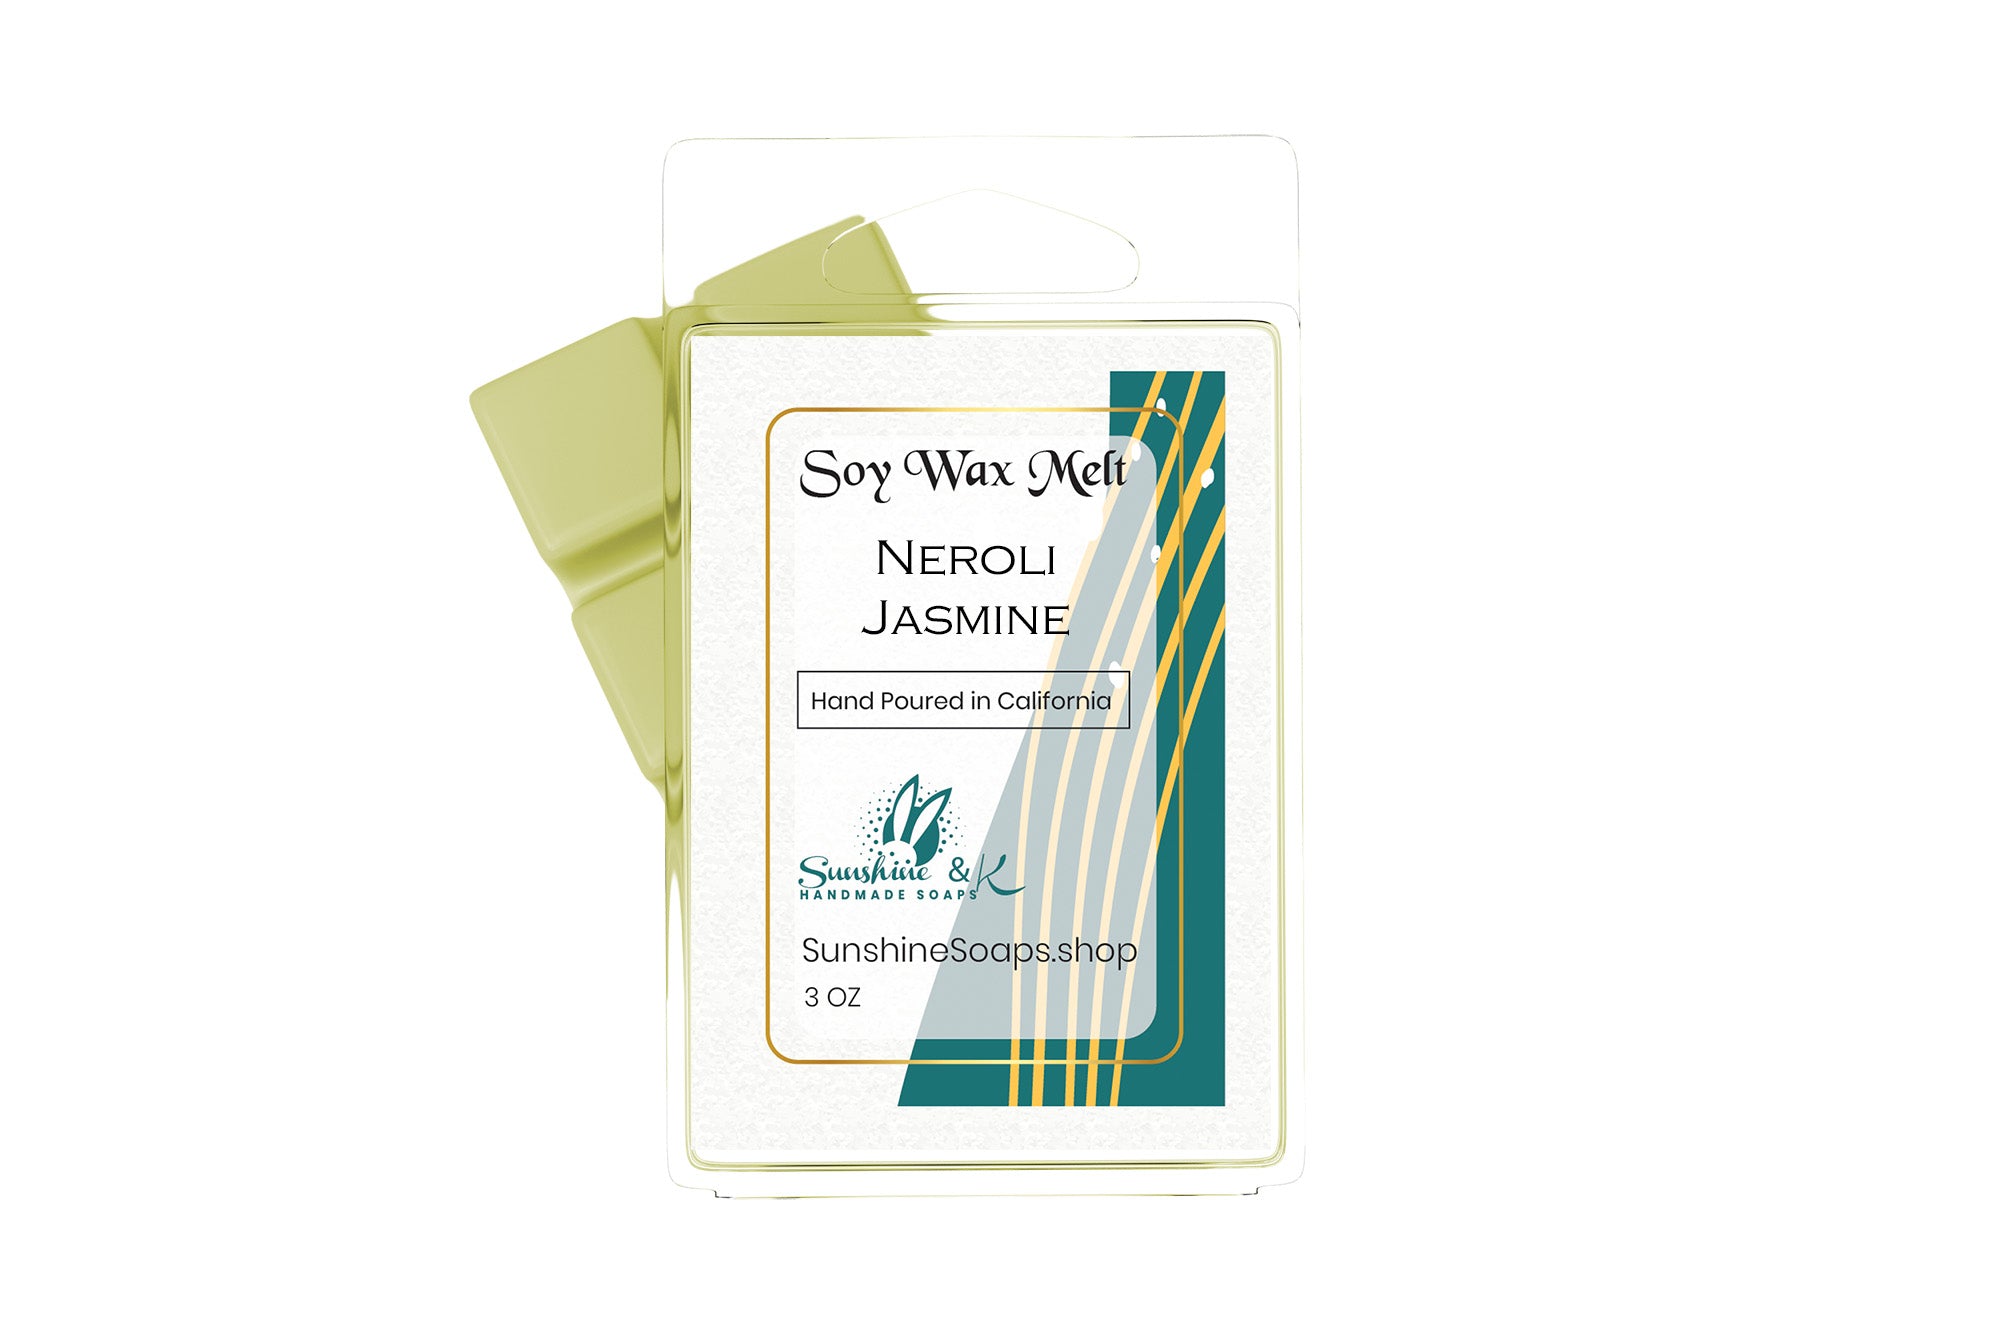 Highly-scented Vegan 100% Soy Wax Melt – American Grown Soy Wax melt – Clamshell – 3 OZ